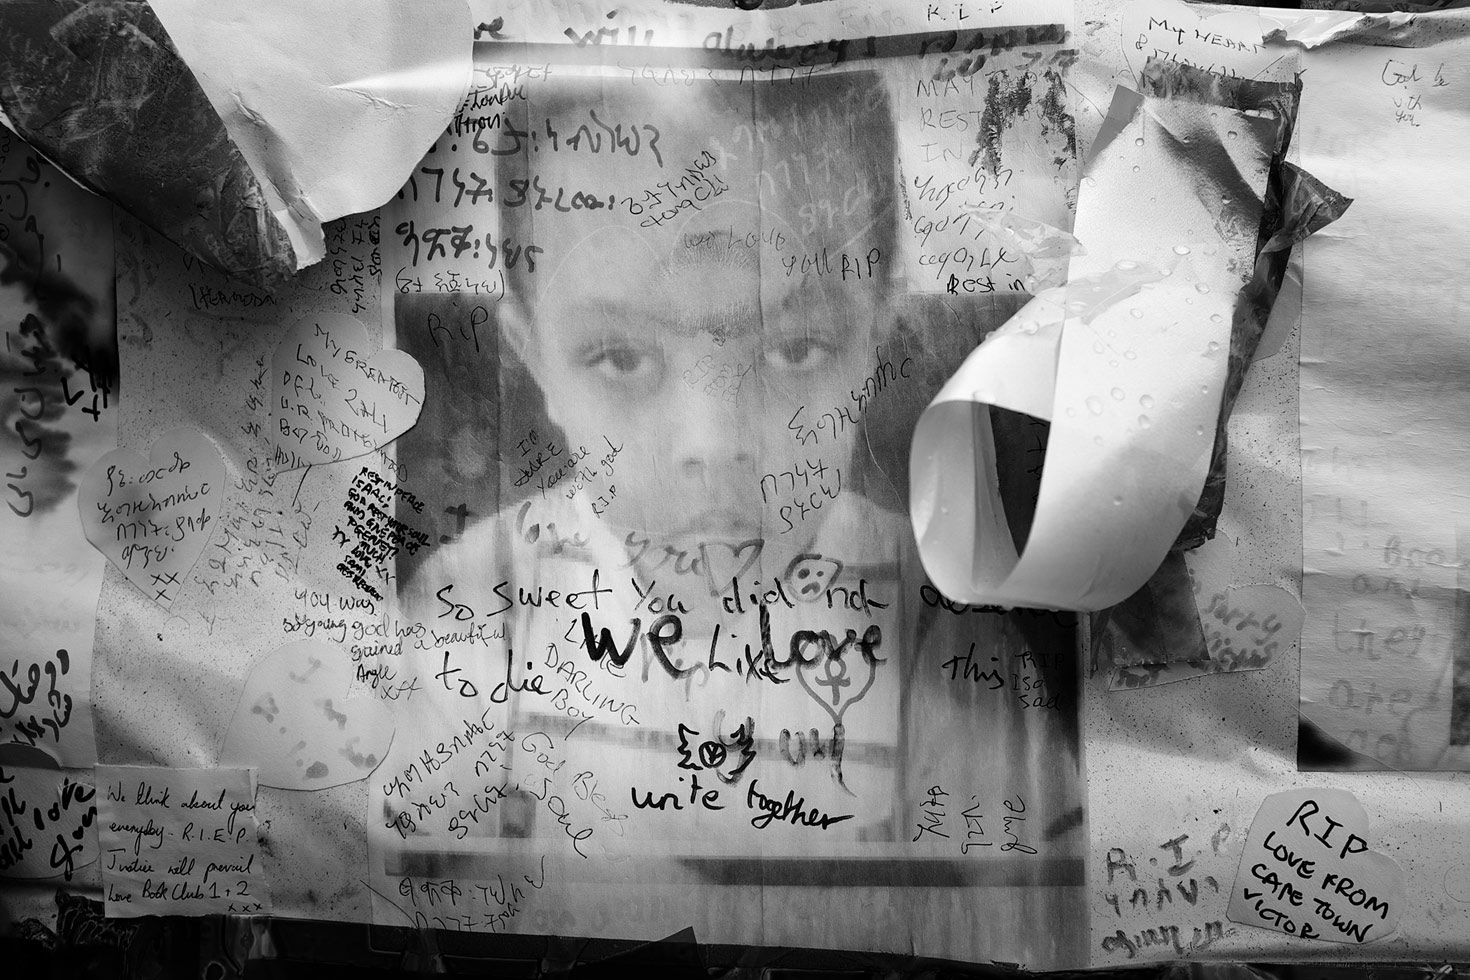 Photograph of victim Isaac Paulos, memorial wall, Bramley Road. Isaac lived on the 18th floor of Grenfell Tower.